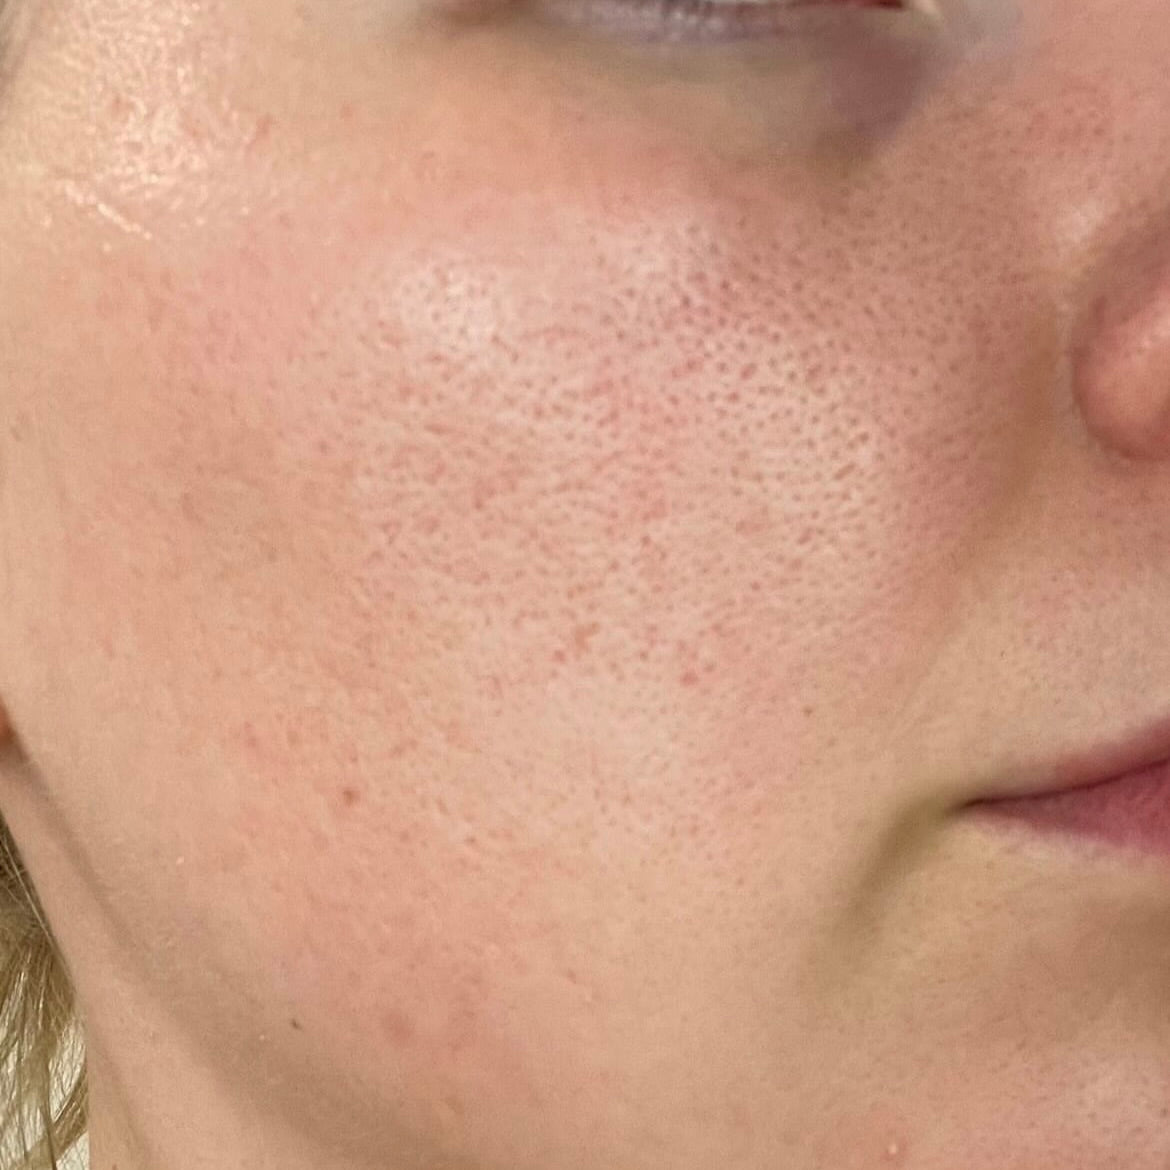 close-up image of a person's face in a before picture to showcase their dull skin condition before treatment